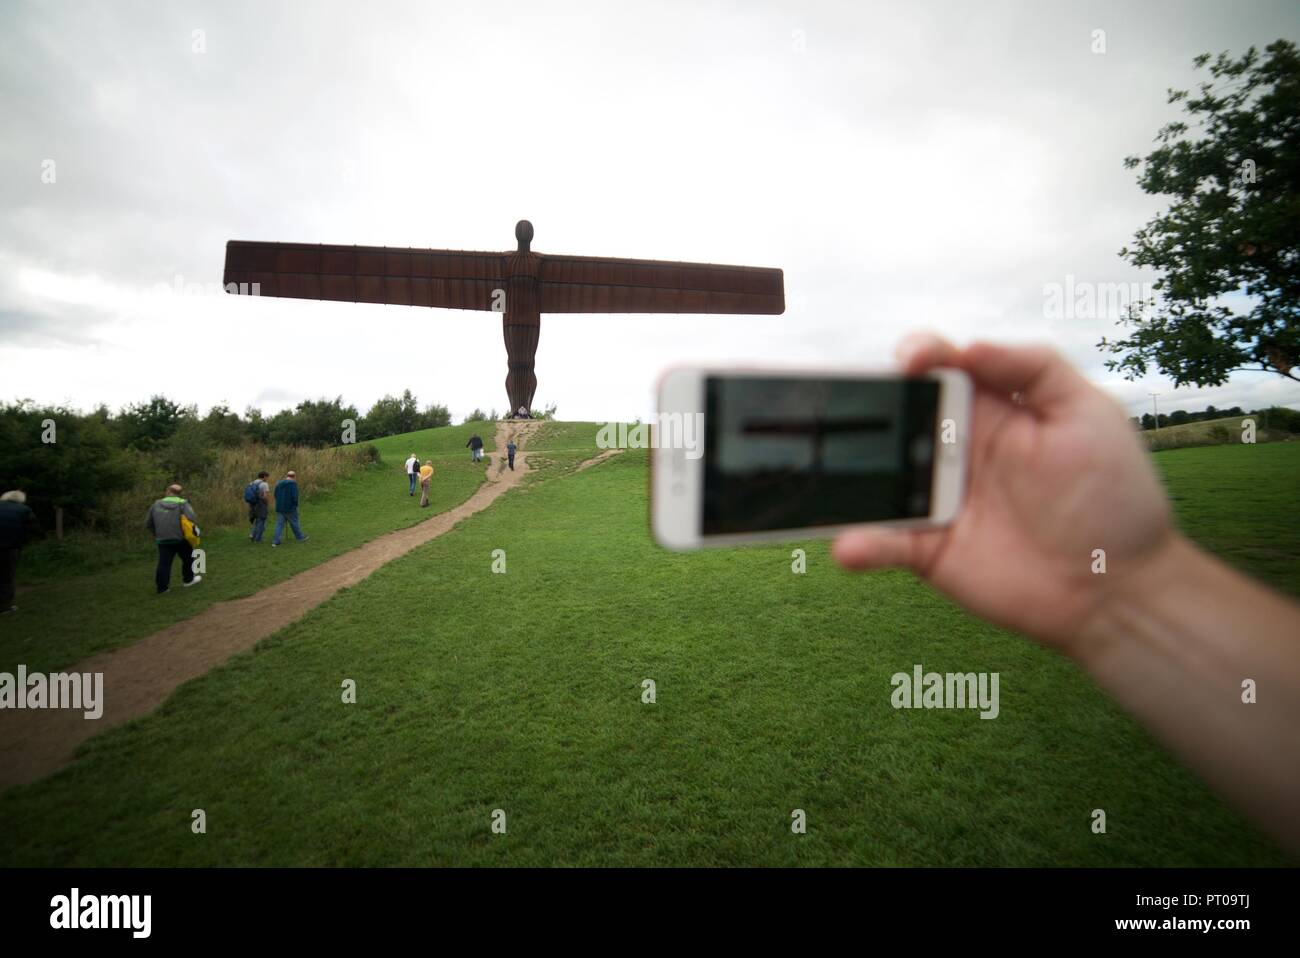 Tourist taking a photo of the Angel of the North statue with their phone, a person photographing the Angel of the North sculpture in Tyne and Wear. Stock Photo